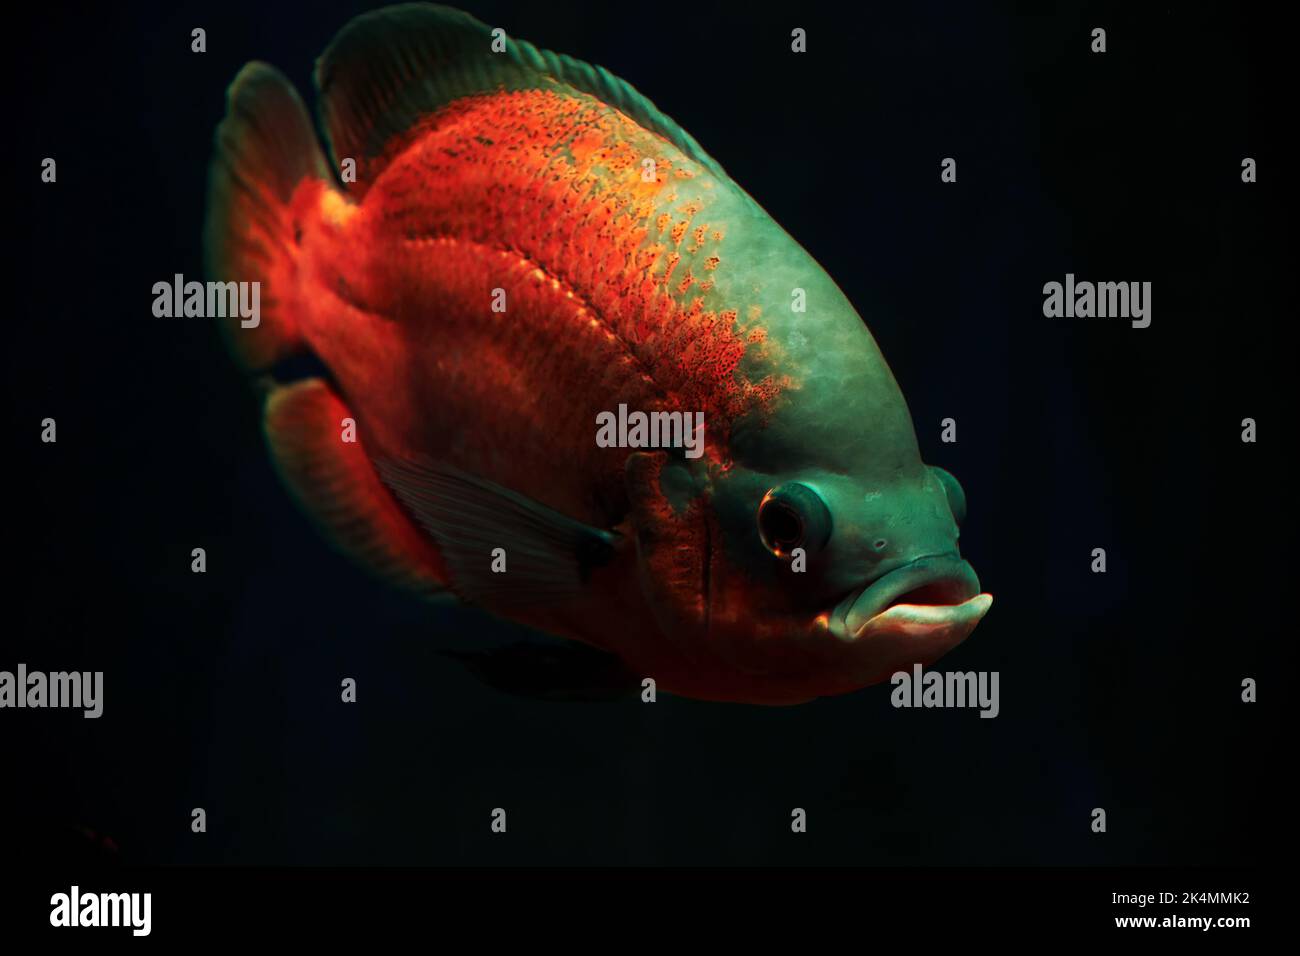 Bright red Astronotus fish deep in the dark sea water. Neon lights. Animals in the wild Stock Photo